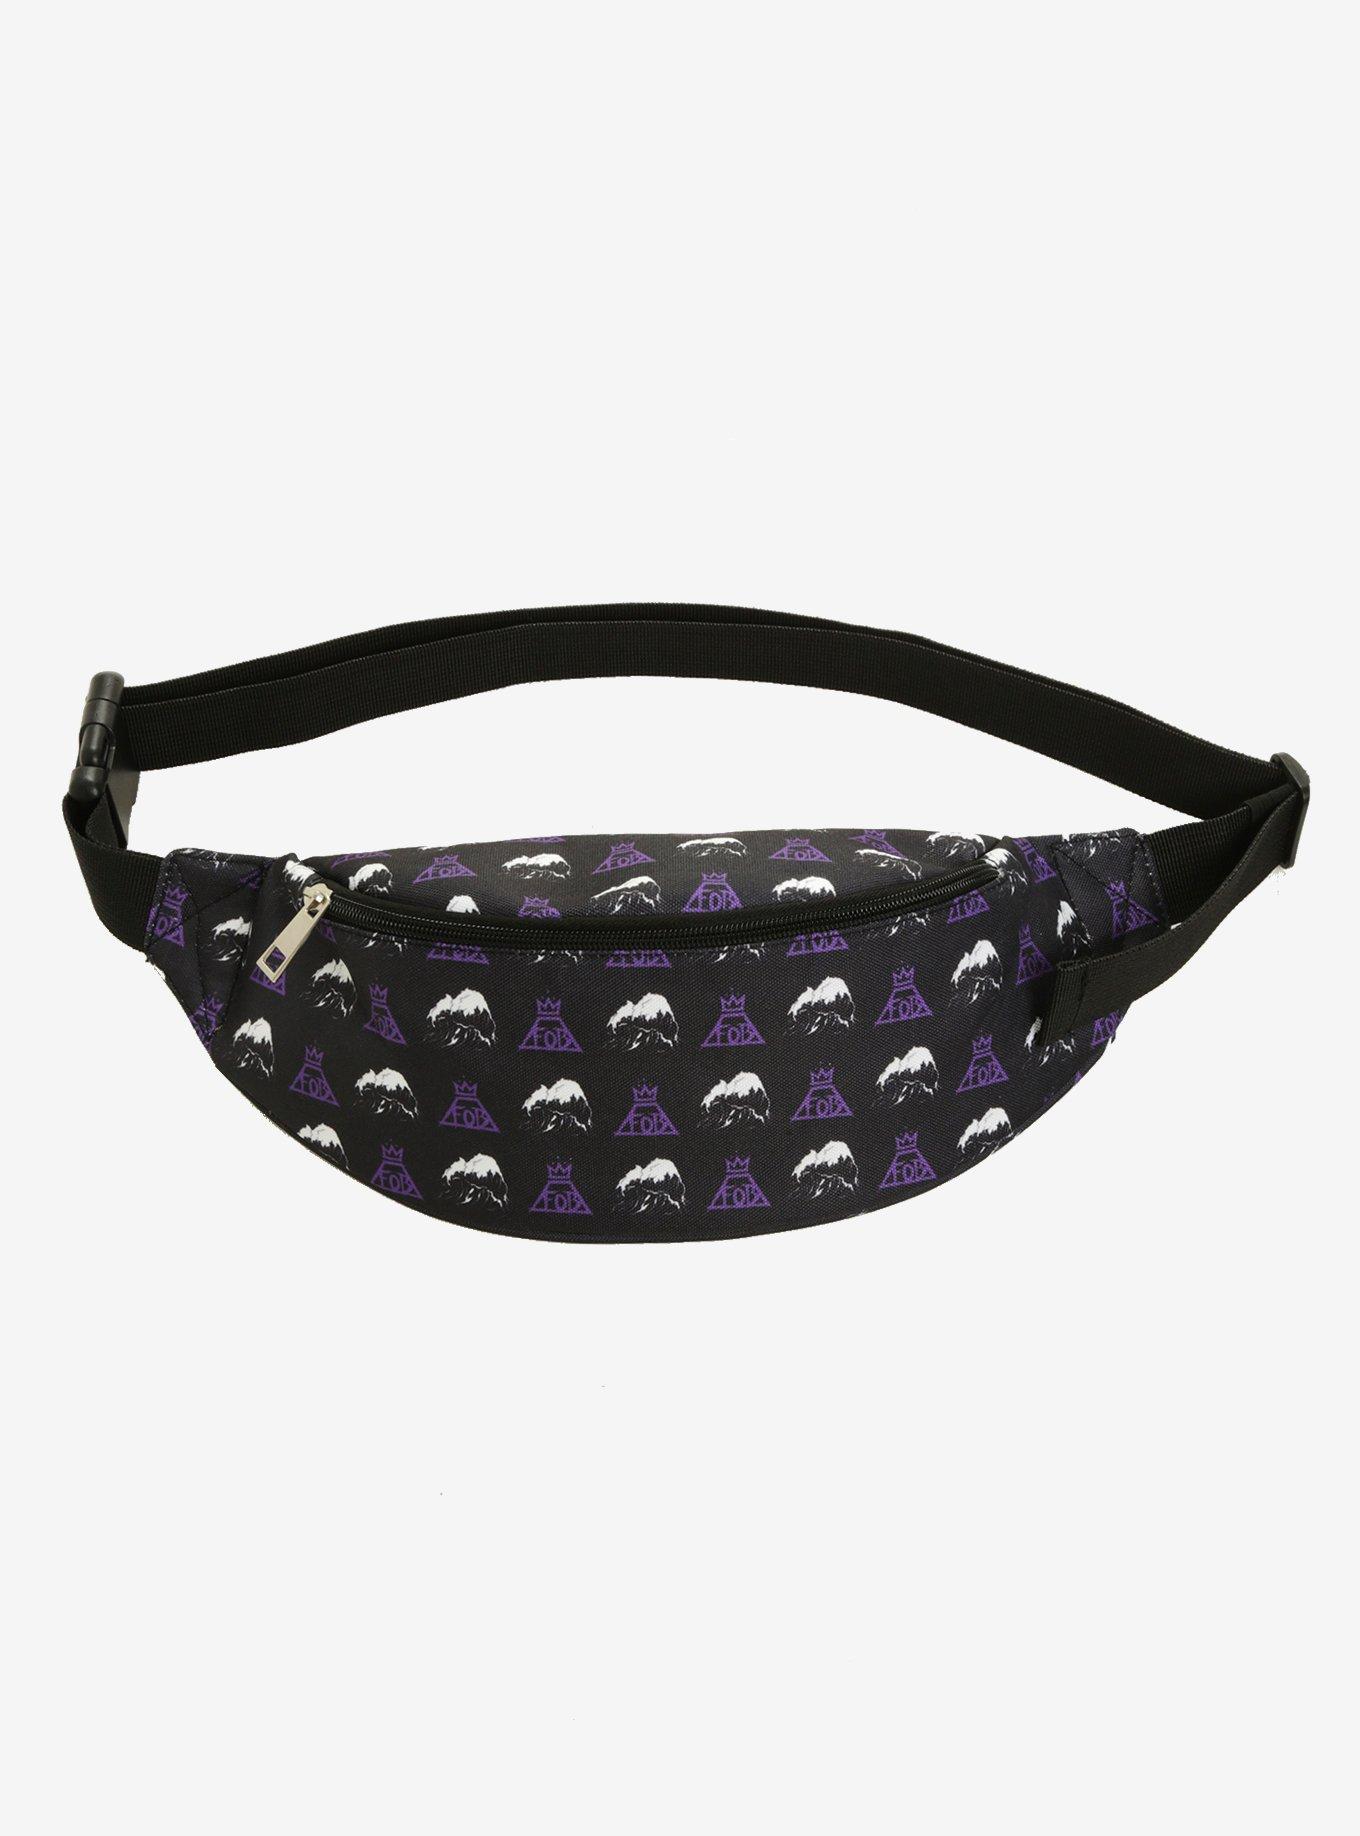 Fall Out Boy Mania Fanny Pack, , hi-res